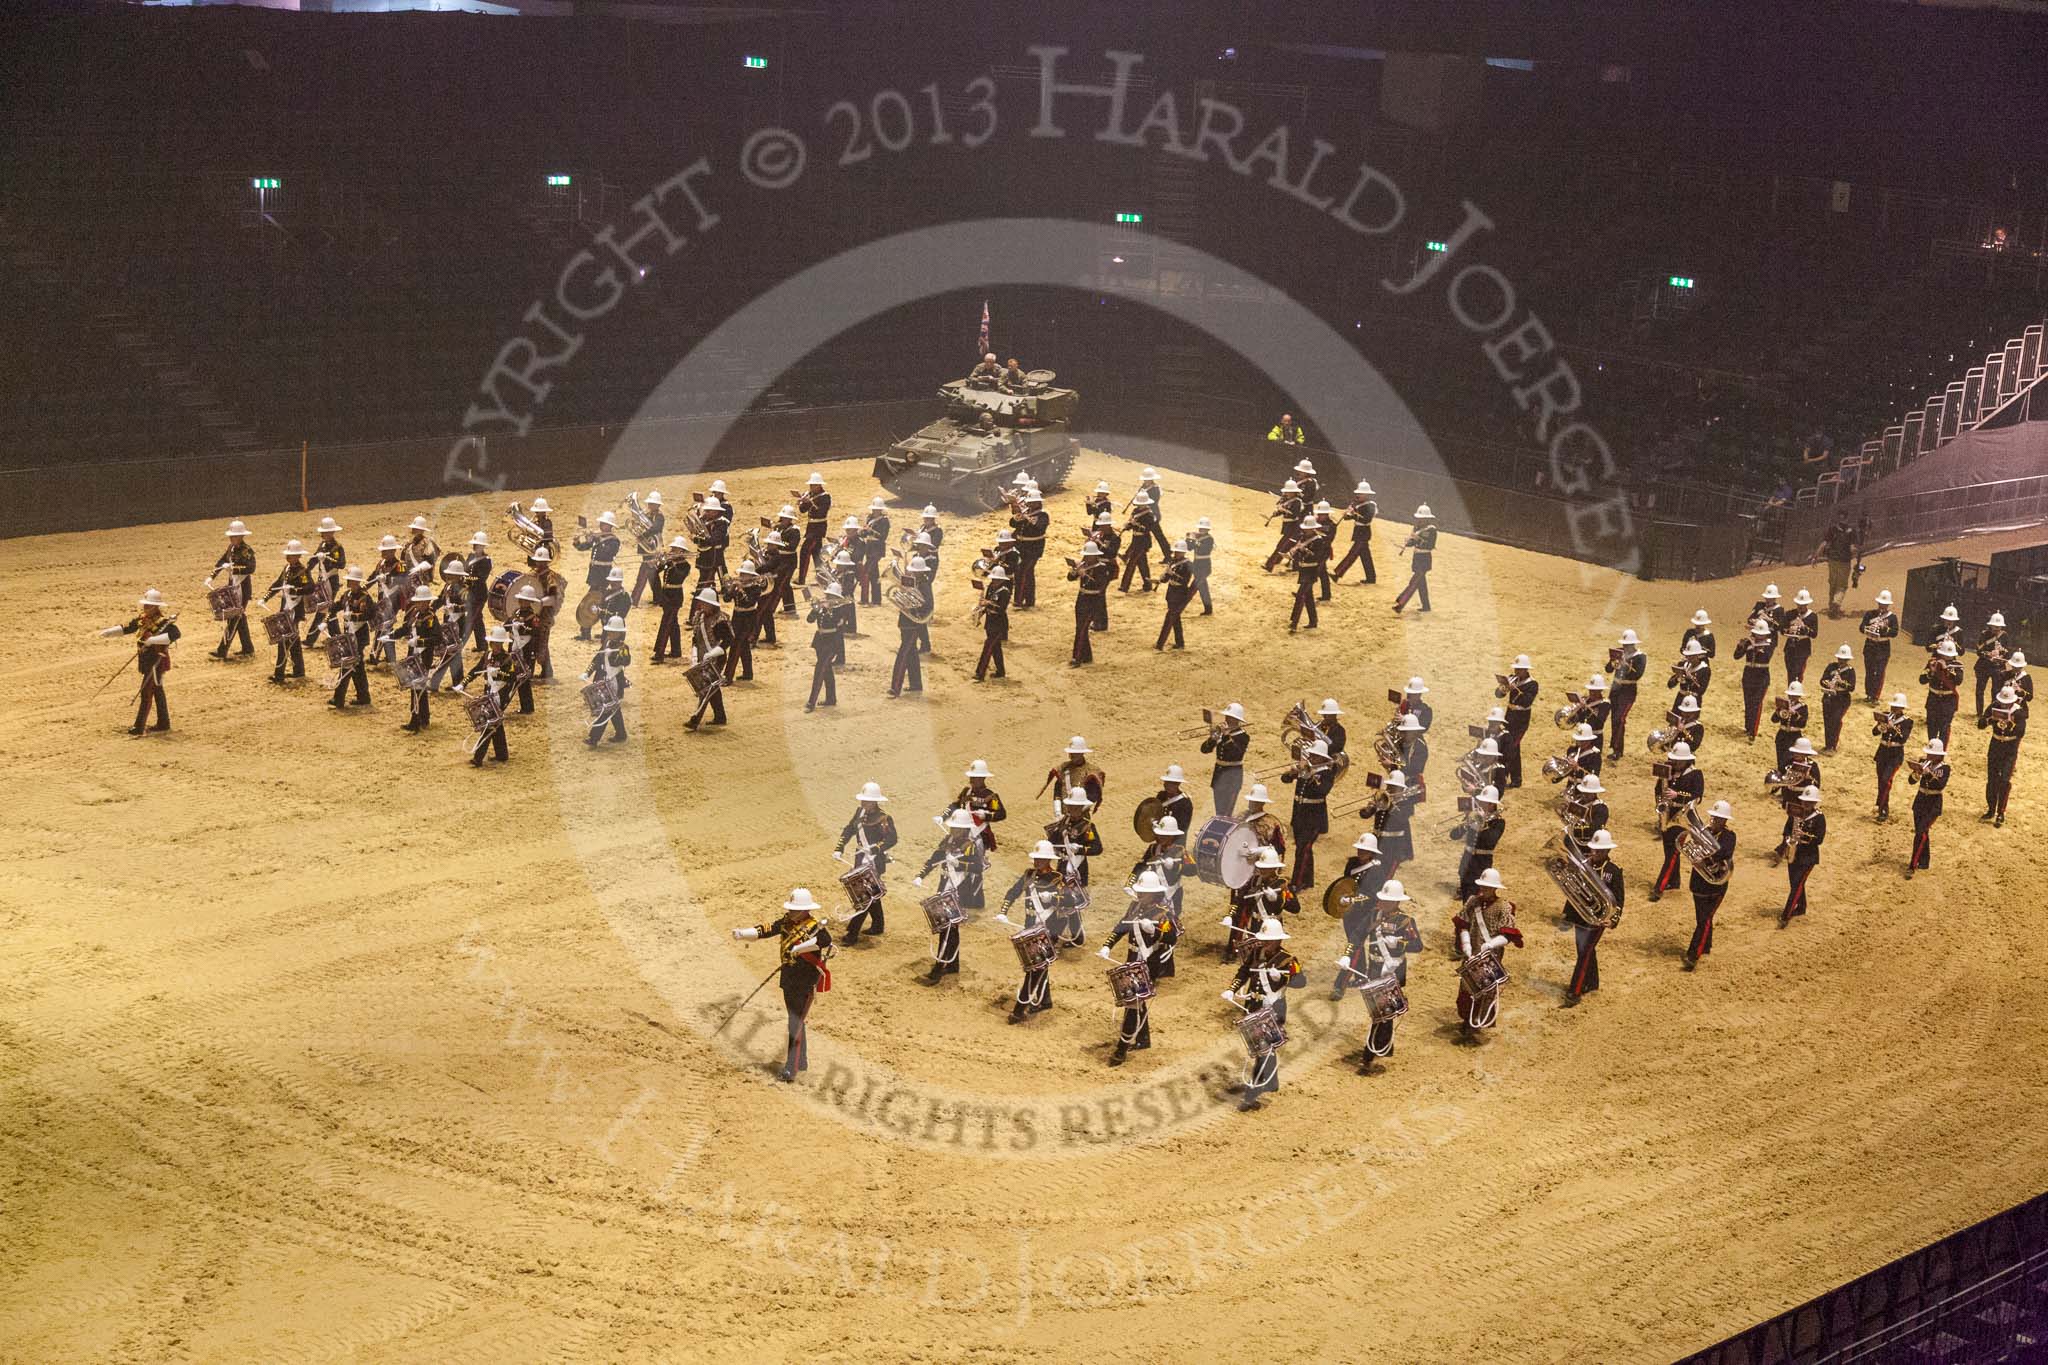 British Military Tournament 2013.
Earls Court,
London SW5,

United Kingdom,
on 06 December 2013 at 16:49, image #479